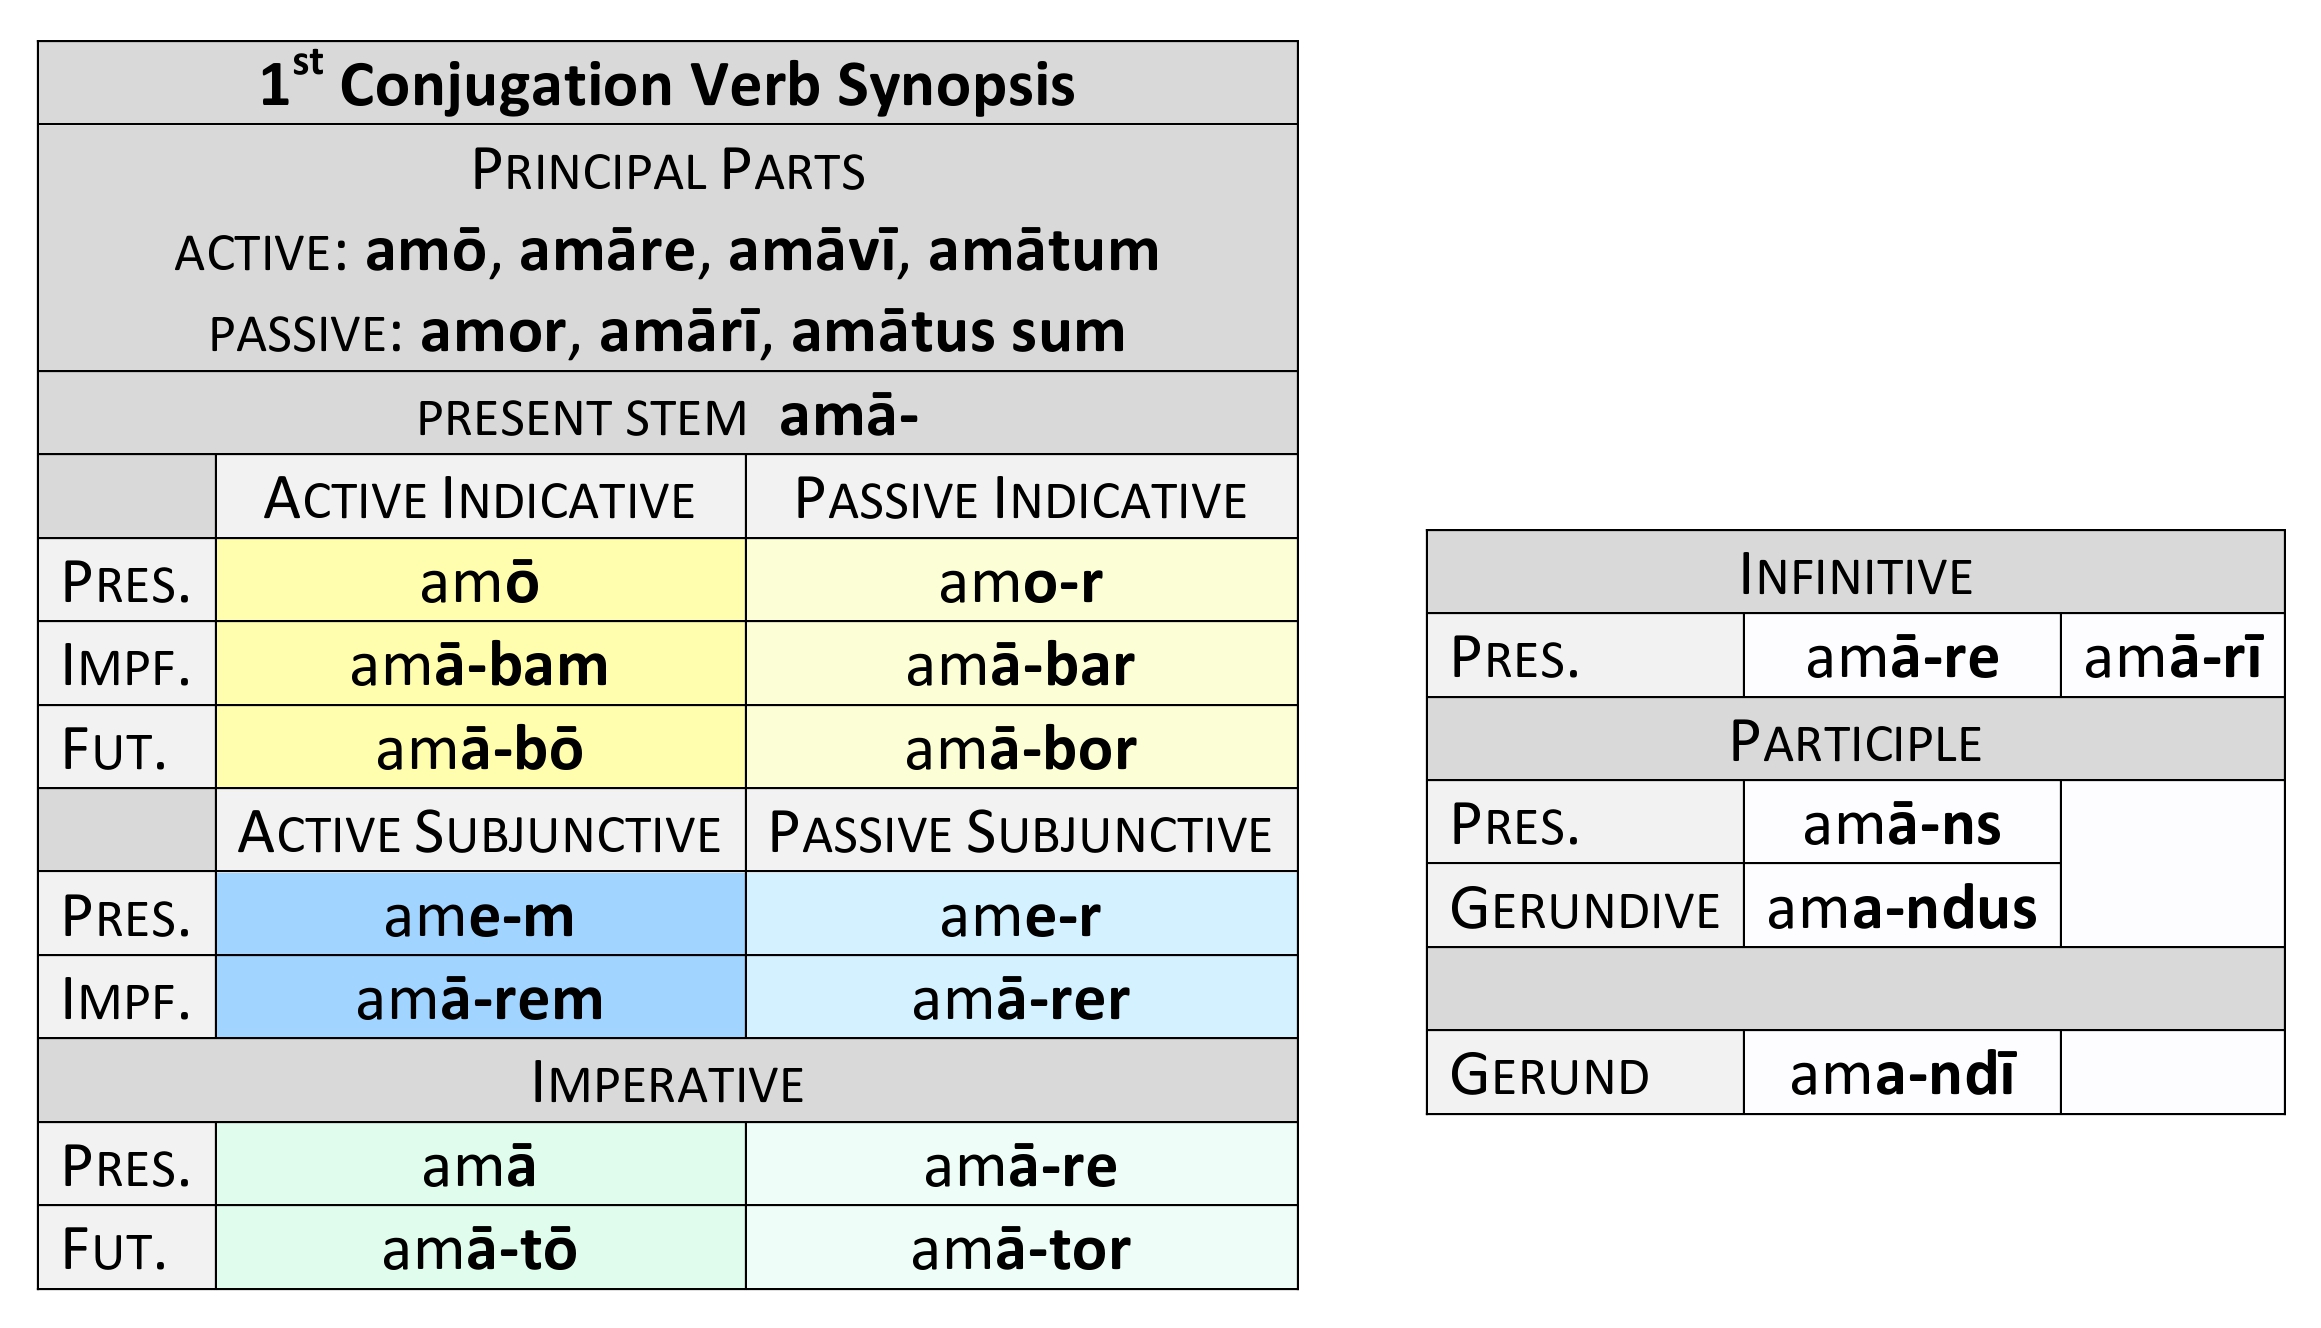 Verb synopsis present system of amō